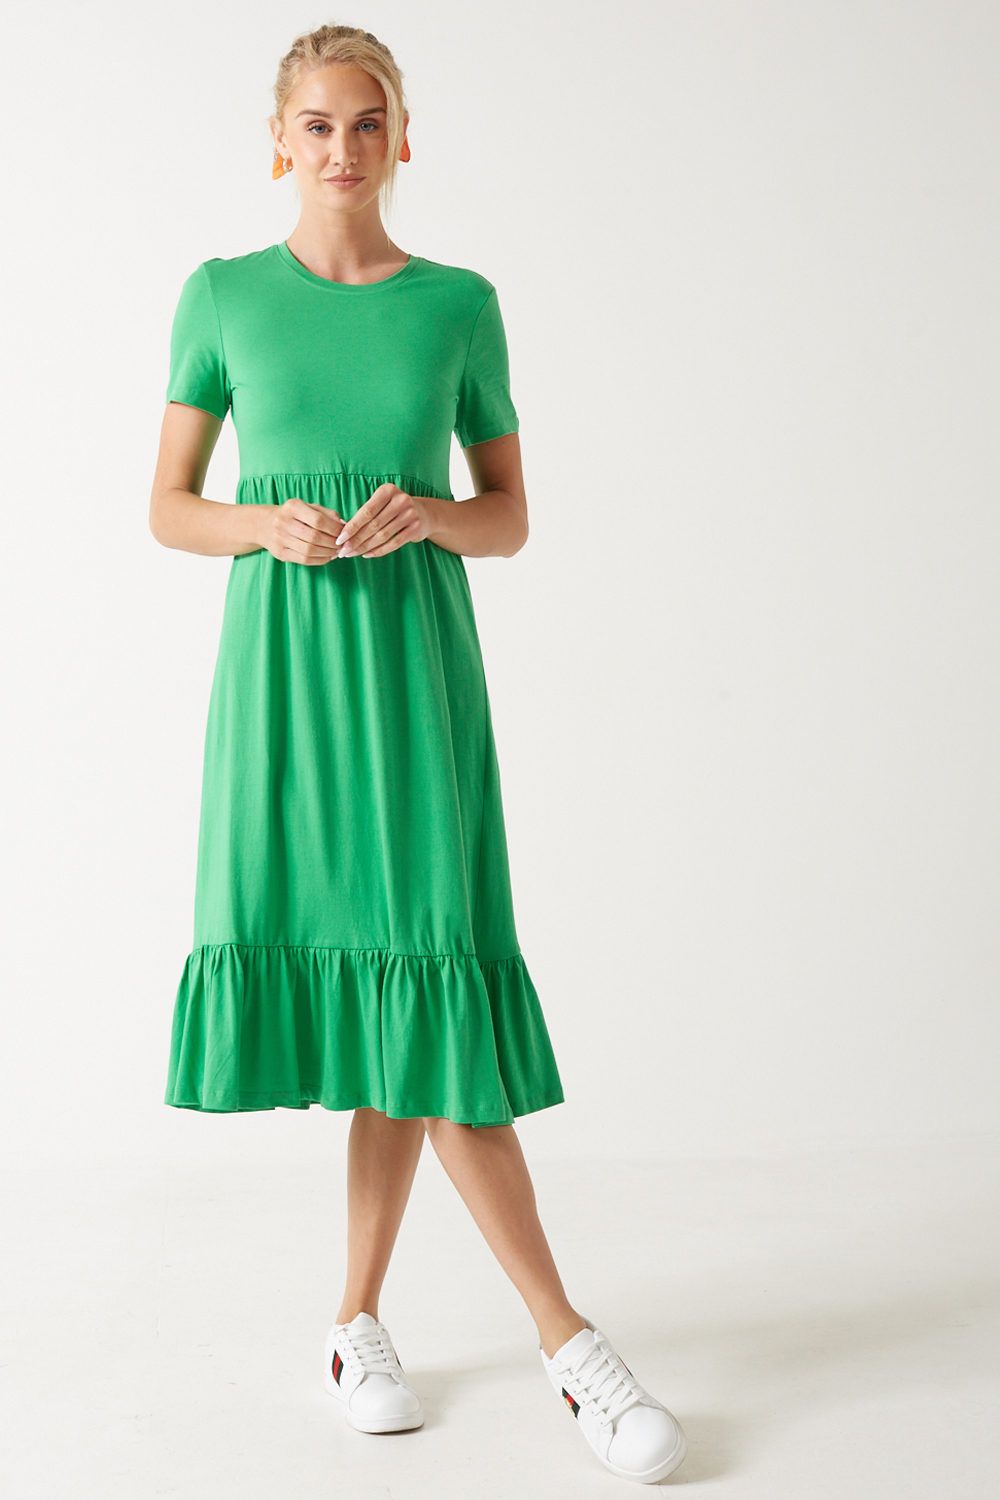 Only May S/S Peplum Calf Dress in Green | iCLOTHING - iCLOTHING | Sommerkleider